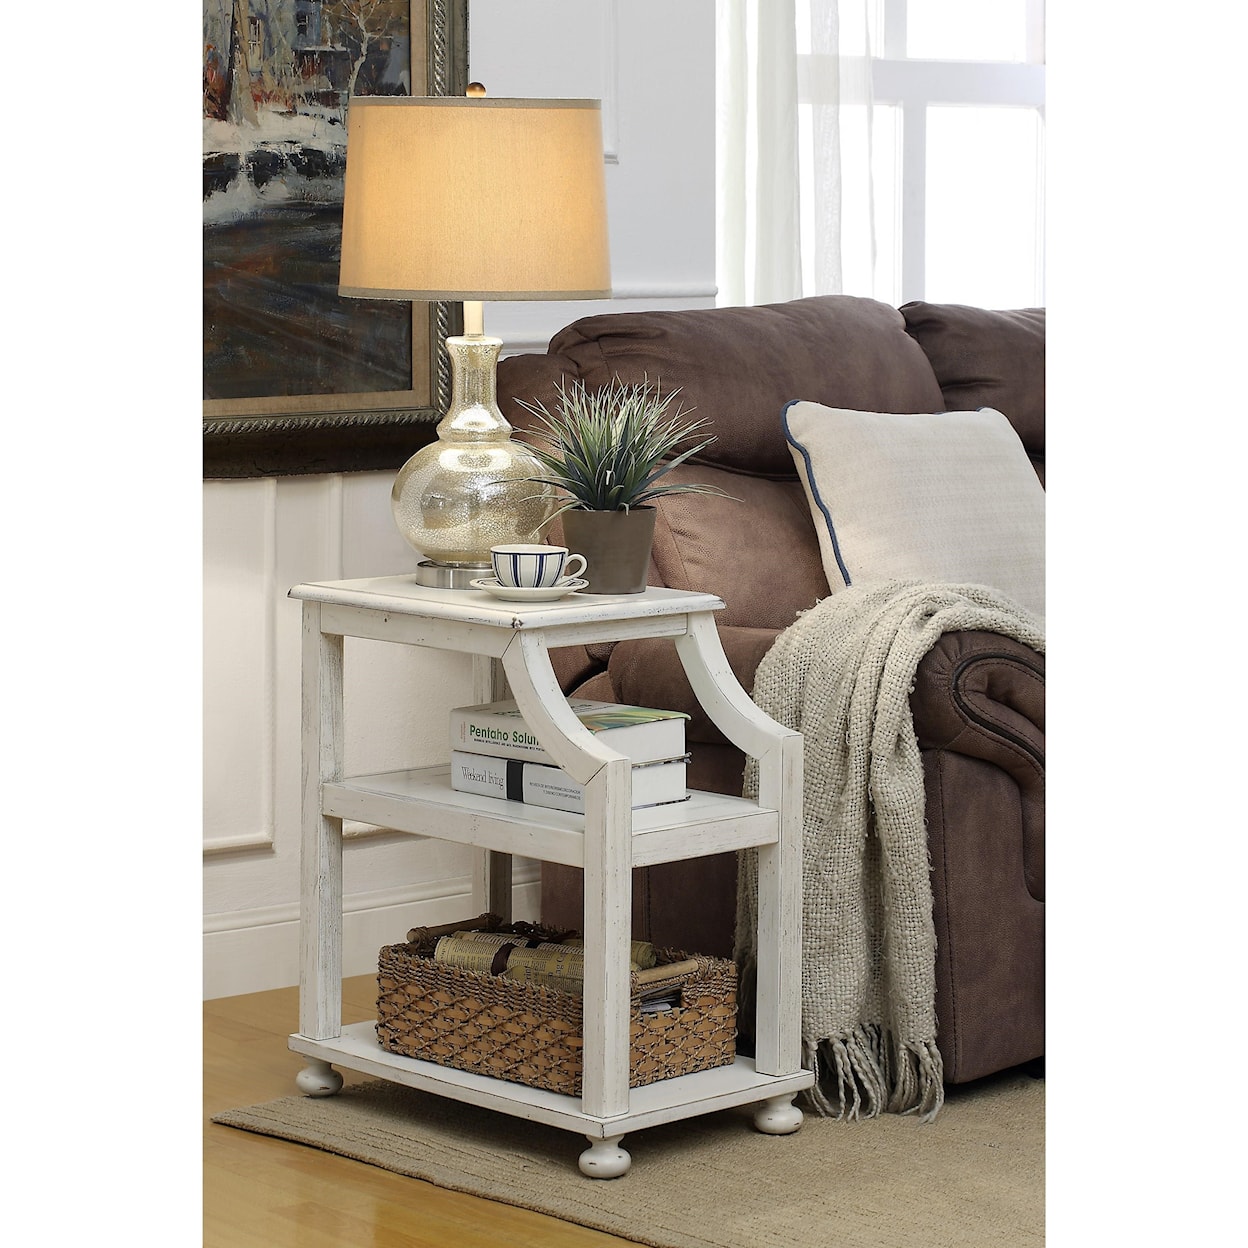 C2C C2C Accents Chairside Accent Table